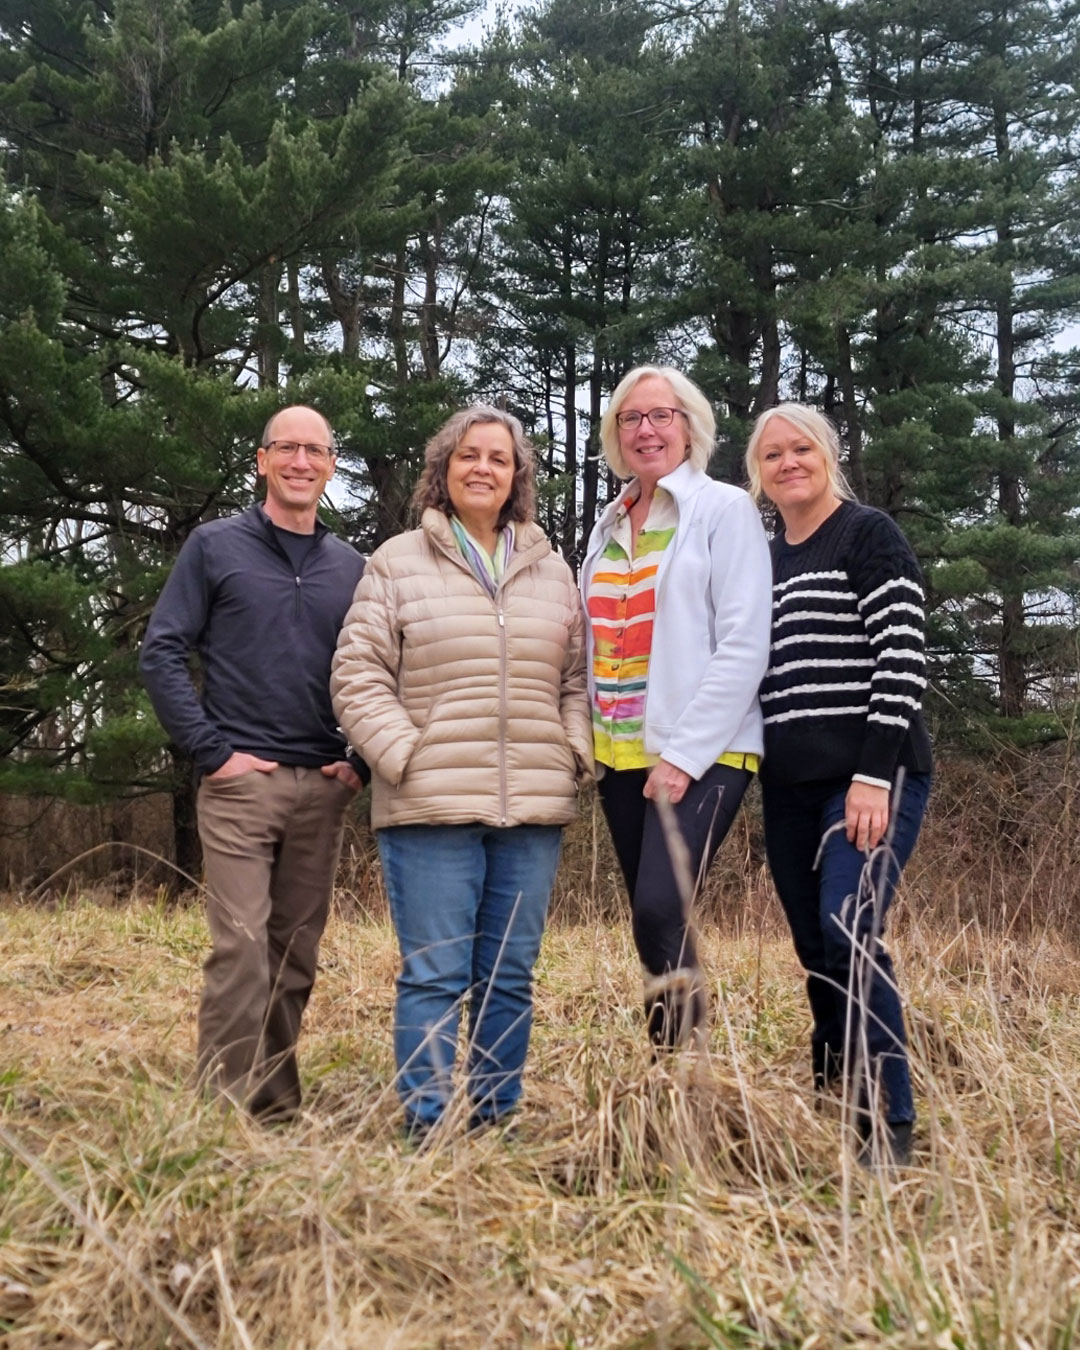 Article authors Lauren Enda, Kevin Kiley, Sharon Scovanner, and Jamie Smith standing in tall grass with pine trees in the background.